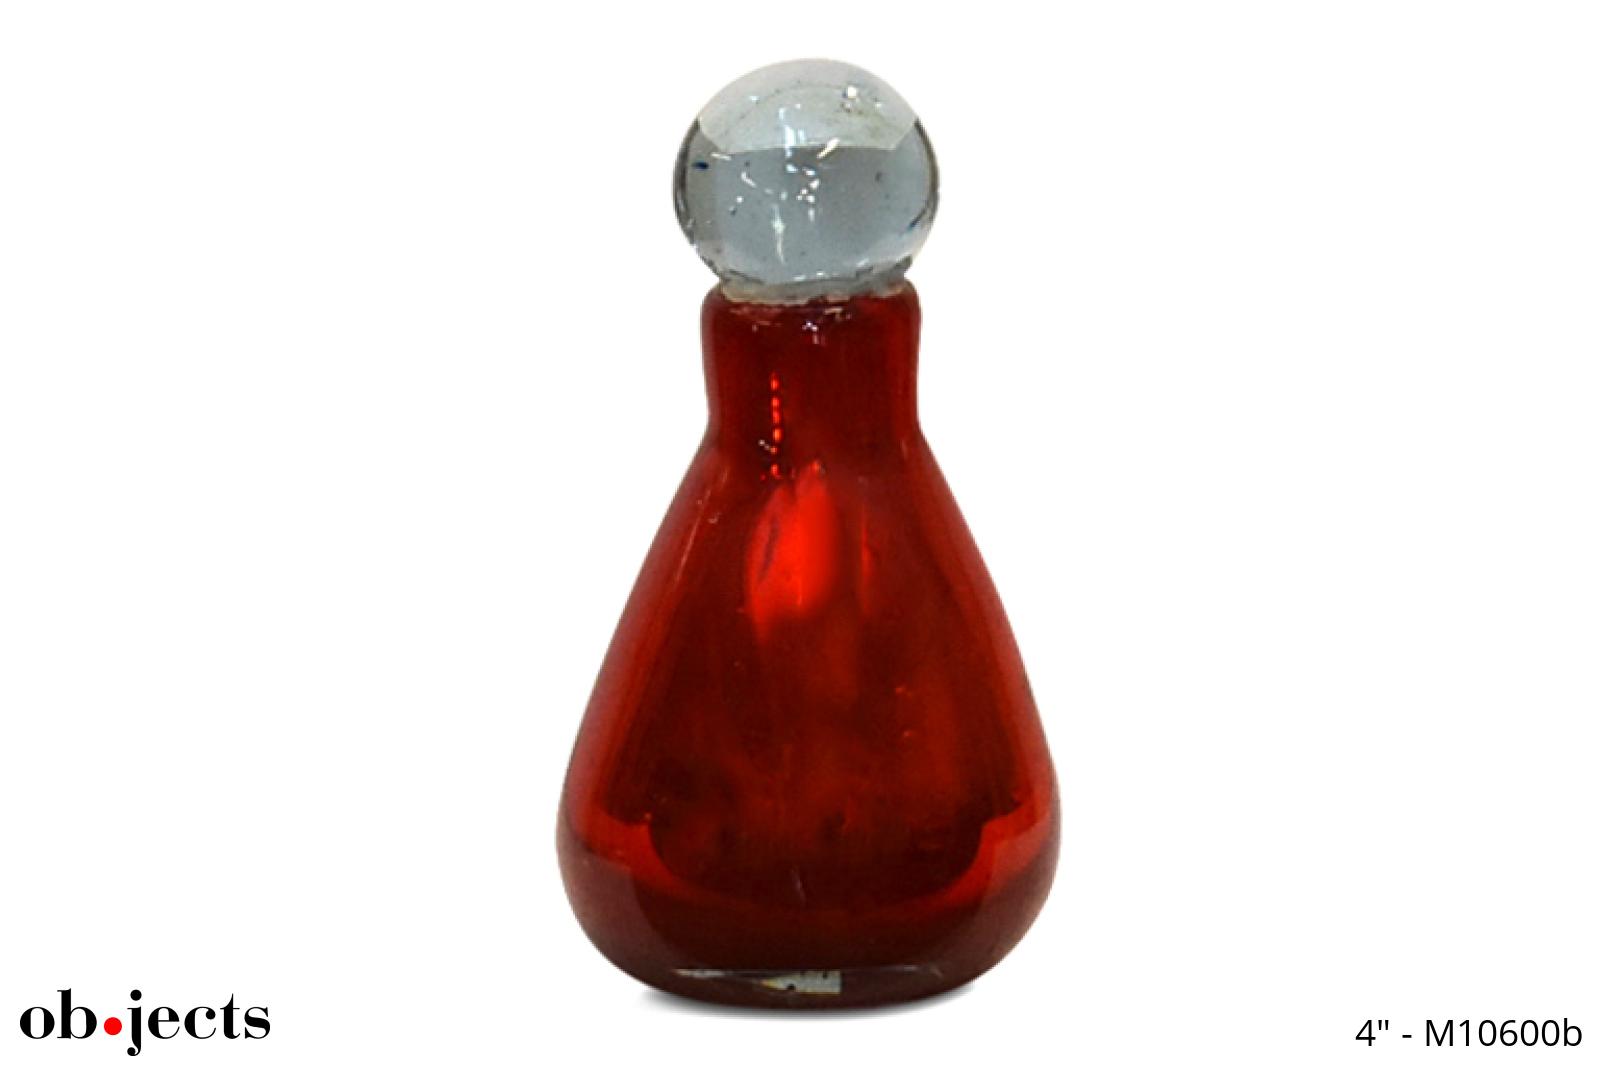 Bottle Decorative Red Mercury Glass | Ob•jects